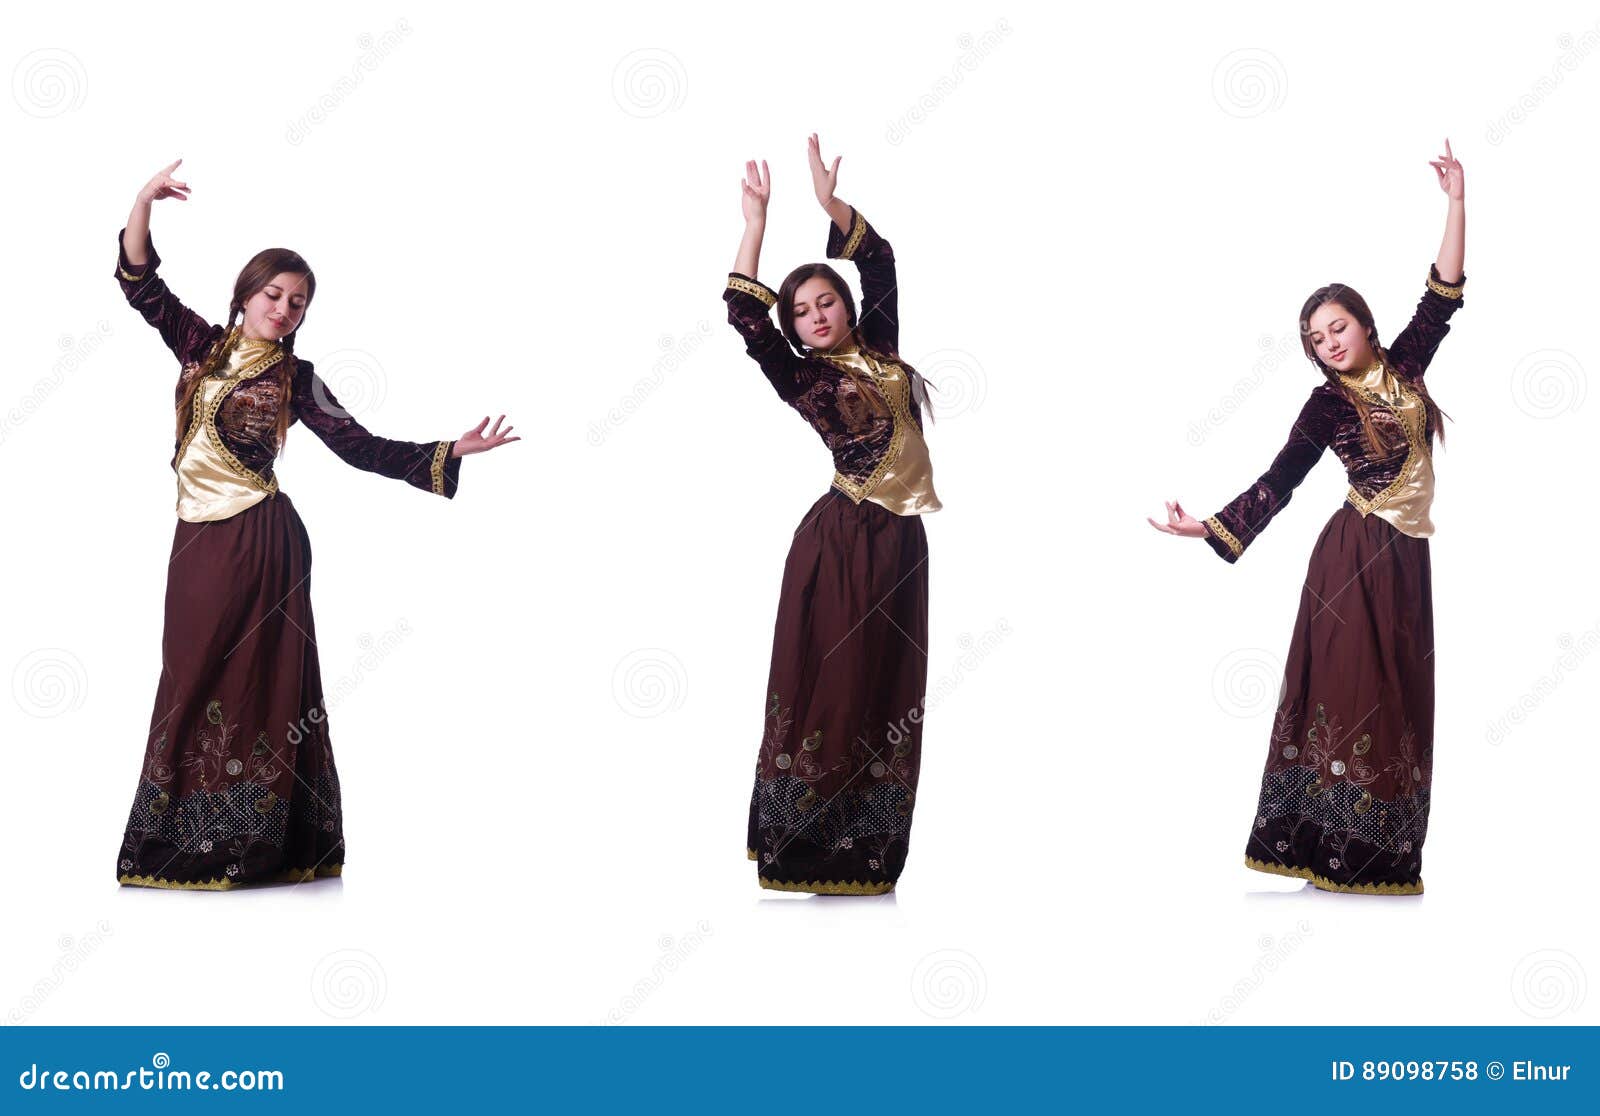 the young lady dancing traditional azeri dance